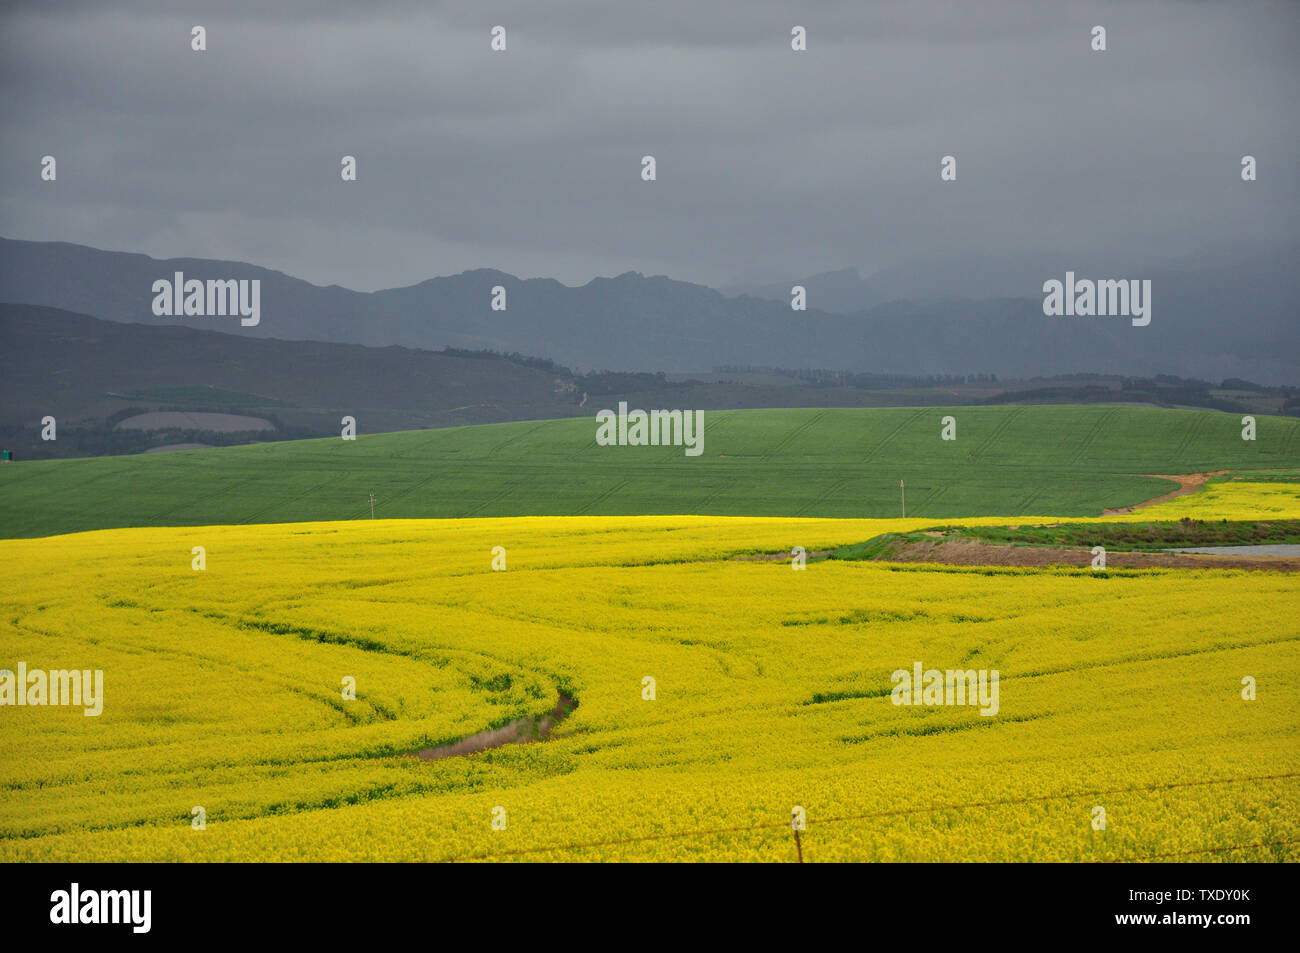 A yellow-flowering Canola plant field near Theewaterskloof dam, Western Cape, with dark rain clouds in the background. 17 September 2015 Stock Photo